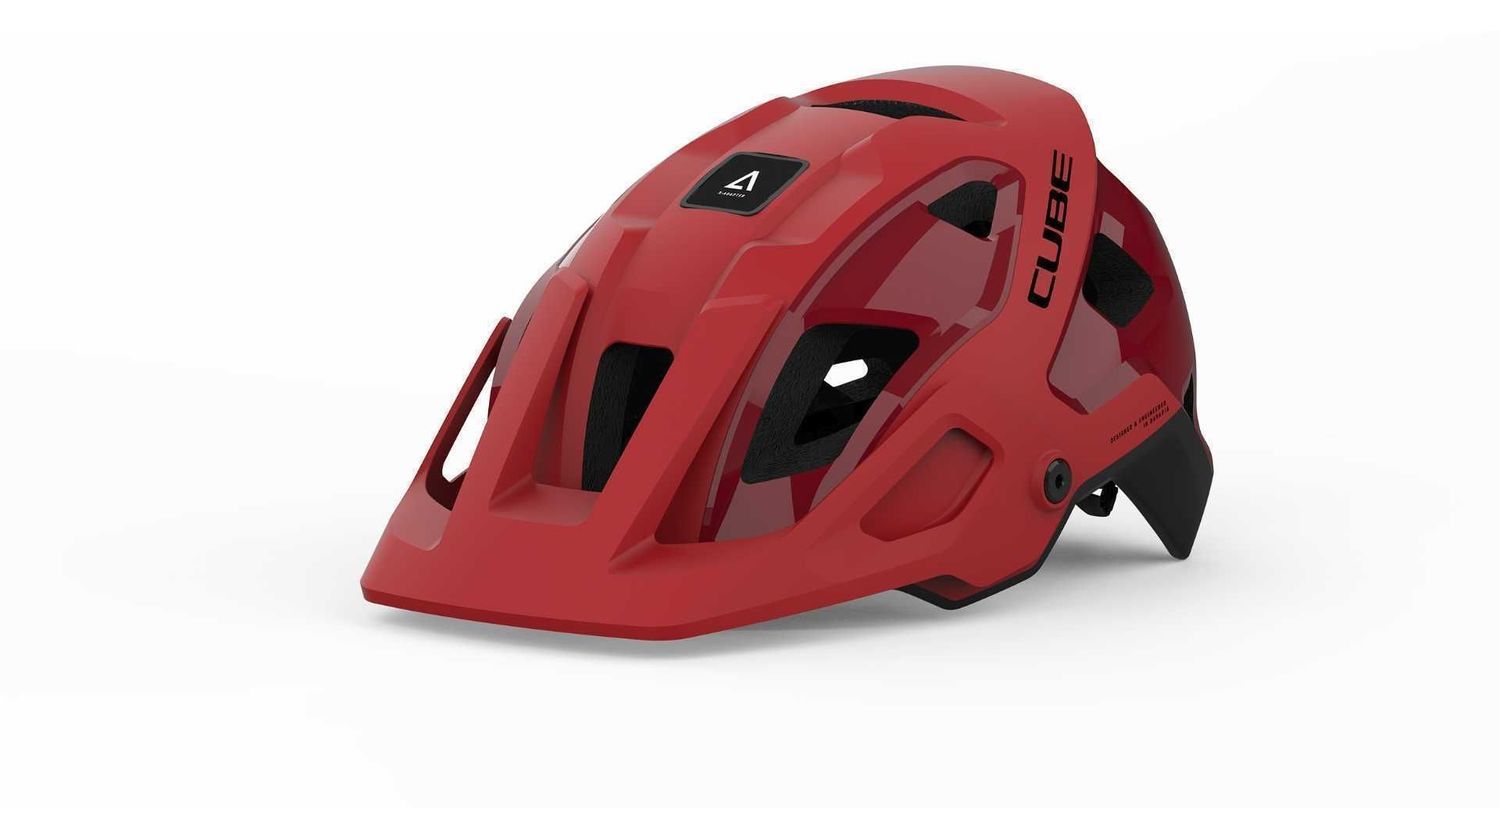 CUBE Helm STROVER red